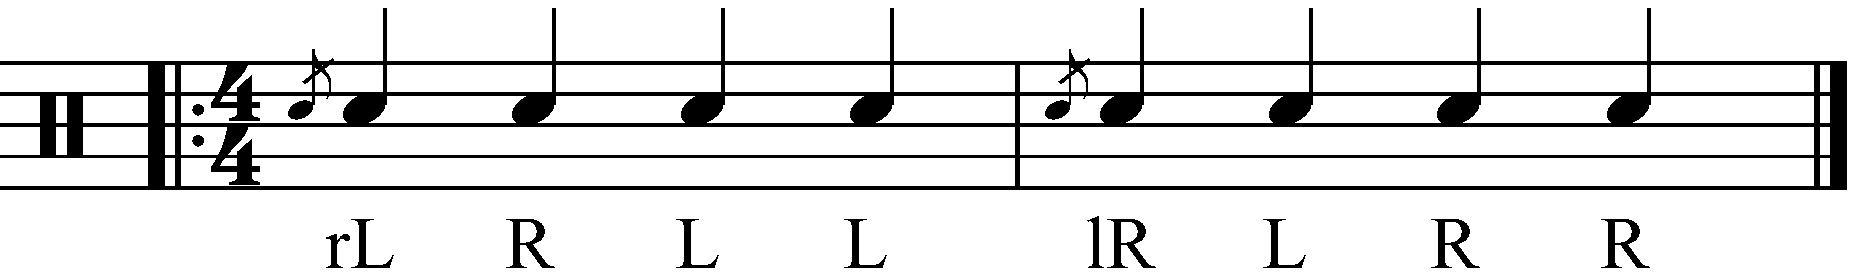 The Flamadiddle as quarter notes